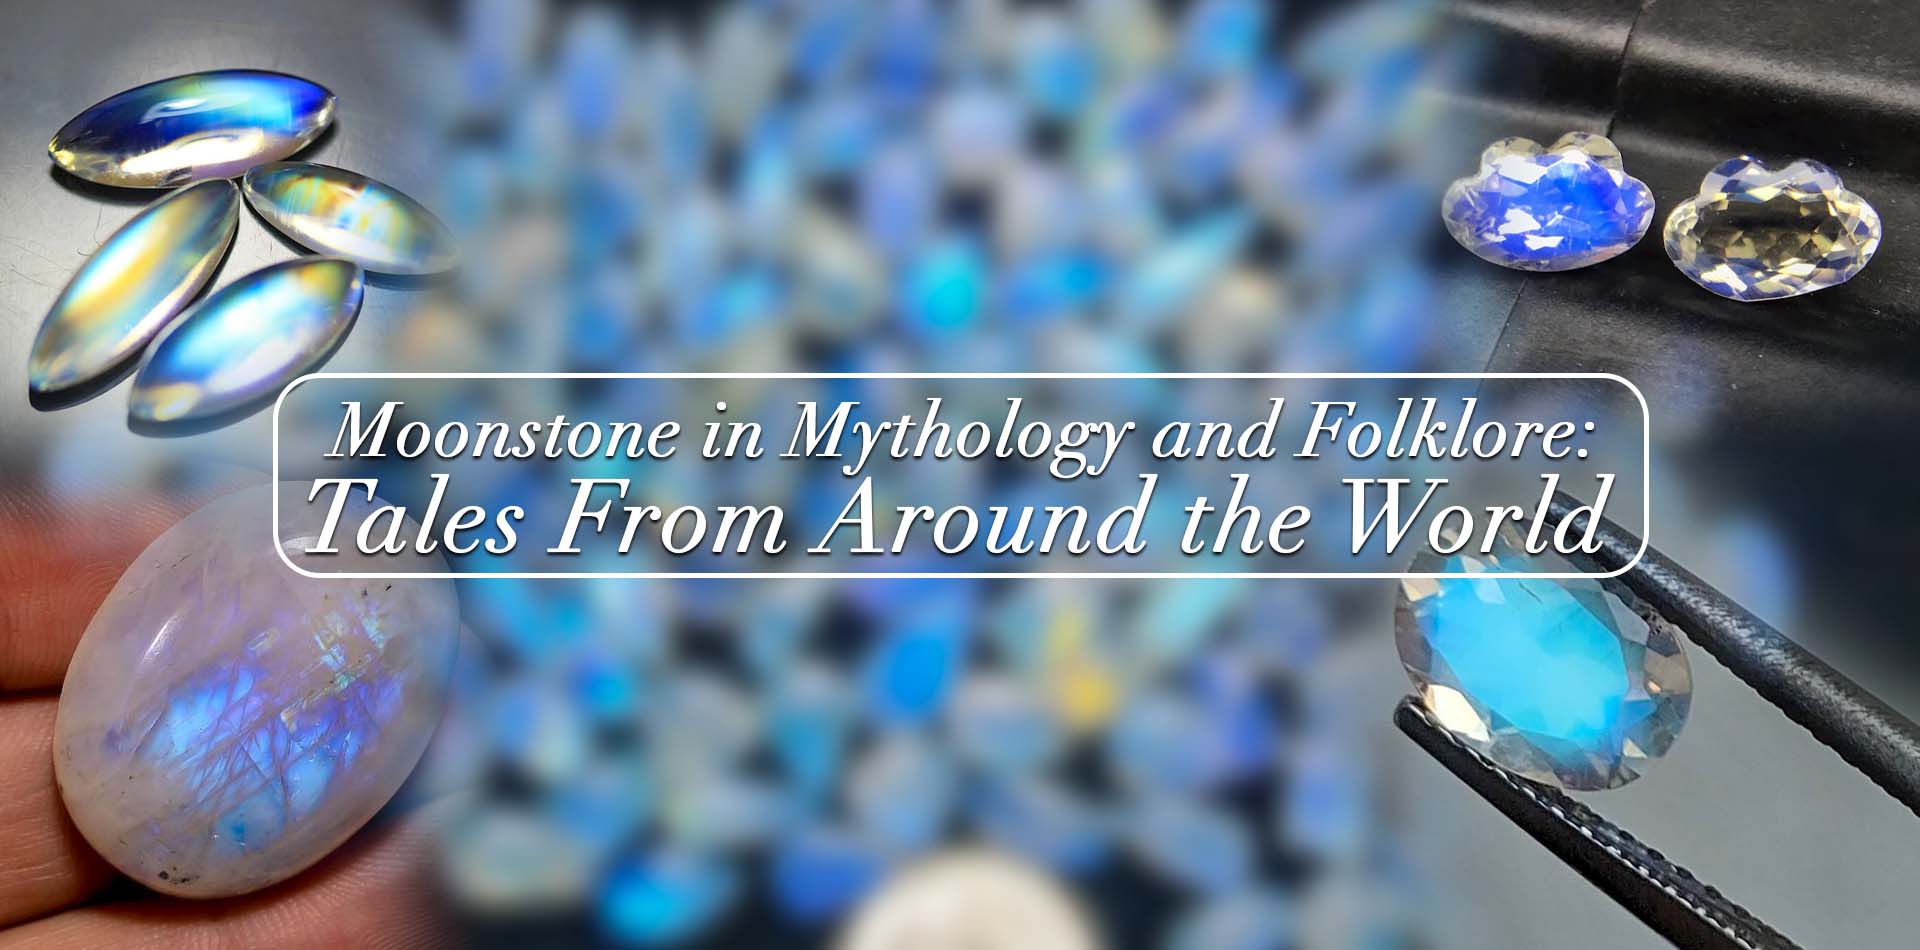 Moonstone in Mythology and Folklore: Tales from Around the World